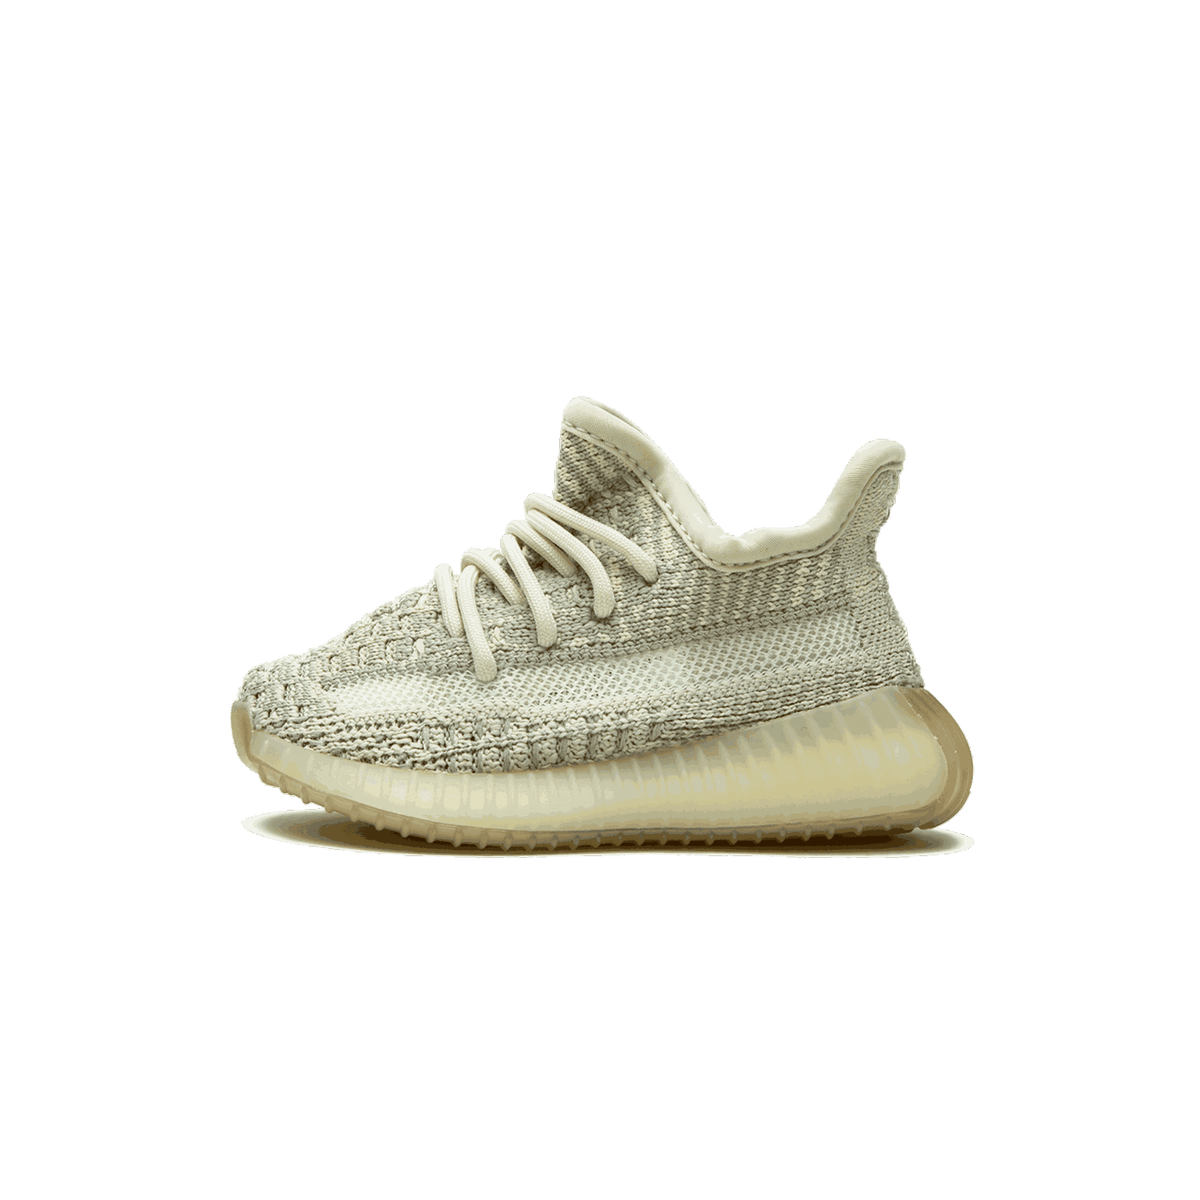 adidas Yeezy Boost 350 V2 Infant Citrin Non Reflective